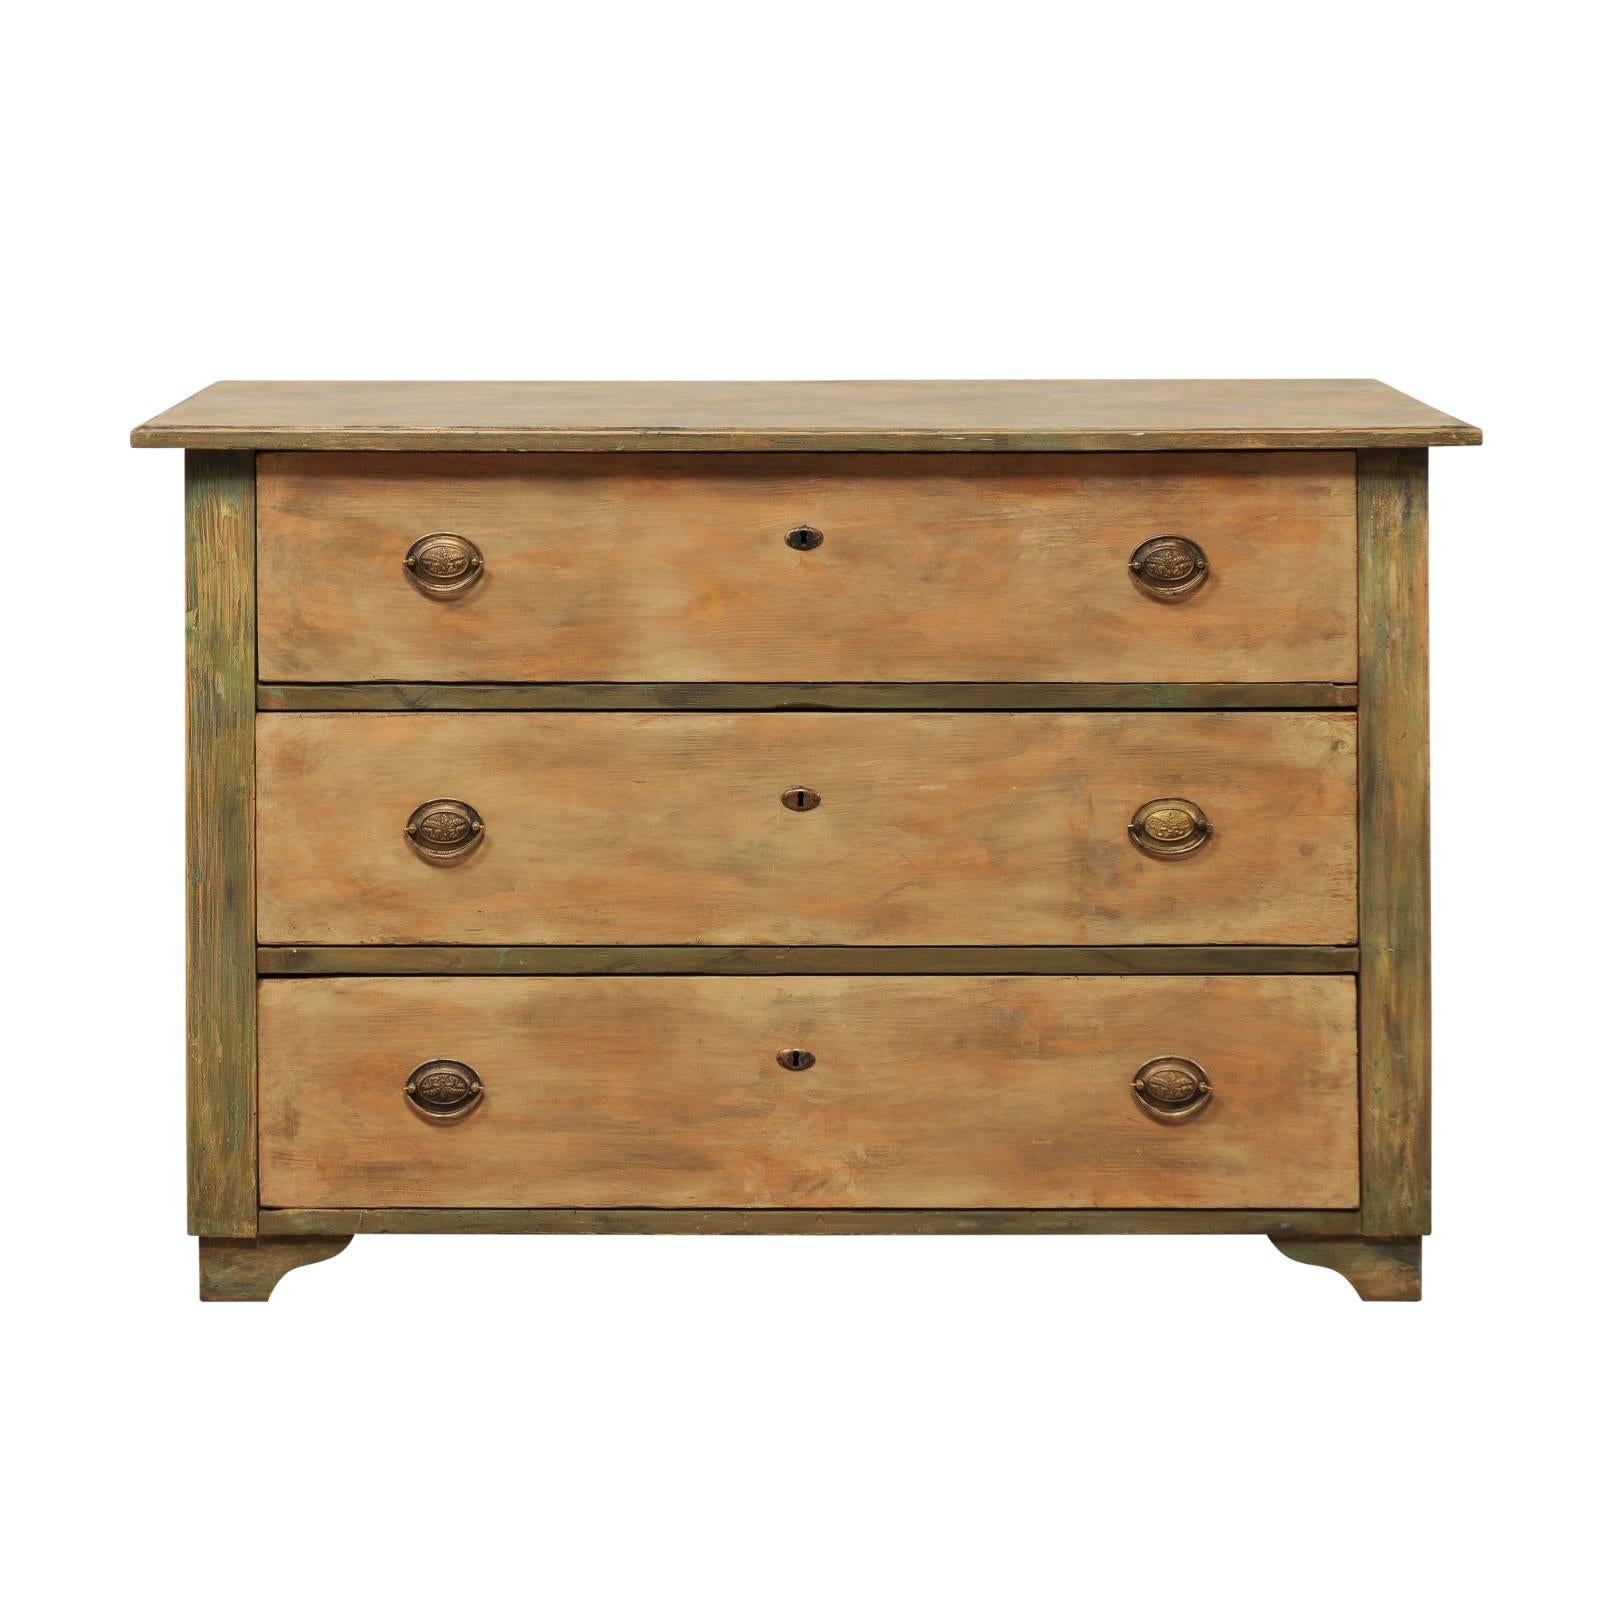 19th Century, Swedish Painted Wood Chest of Drawers in Beige and Green